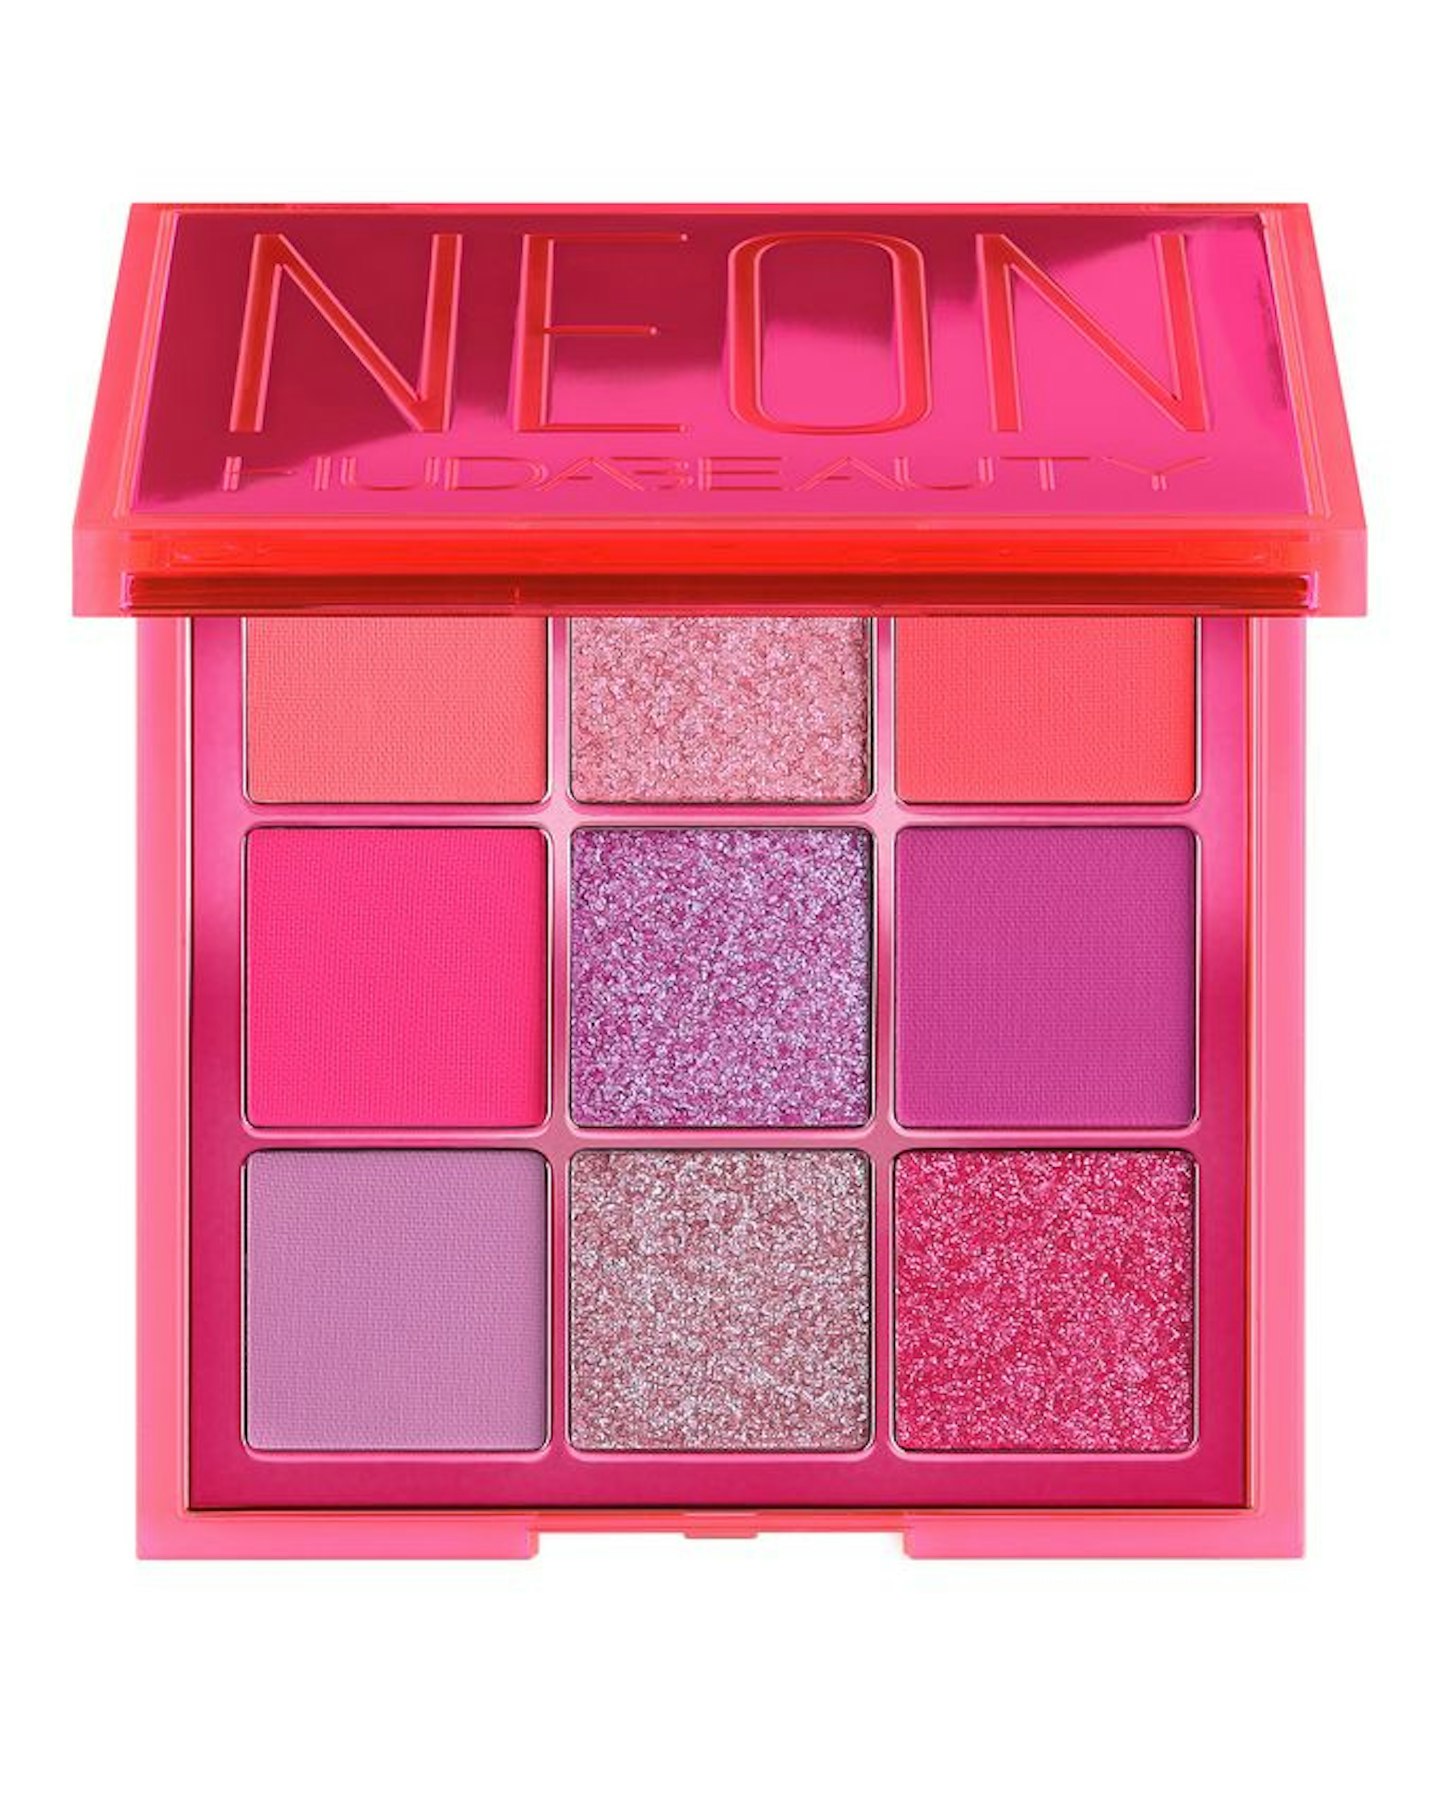 Huda Beauty Neon Pink Obsessions Palette, £27